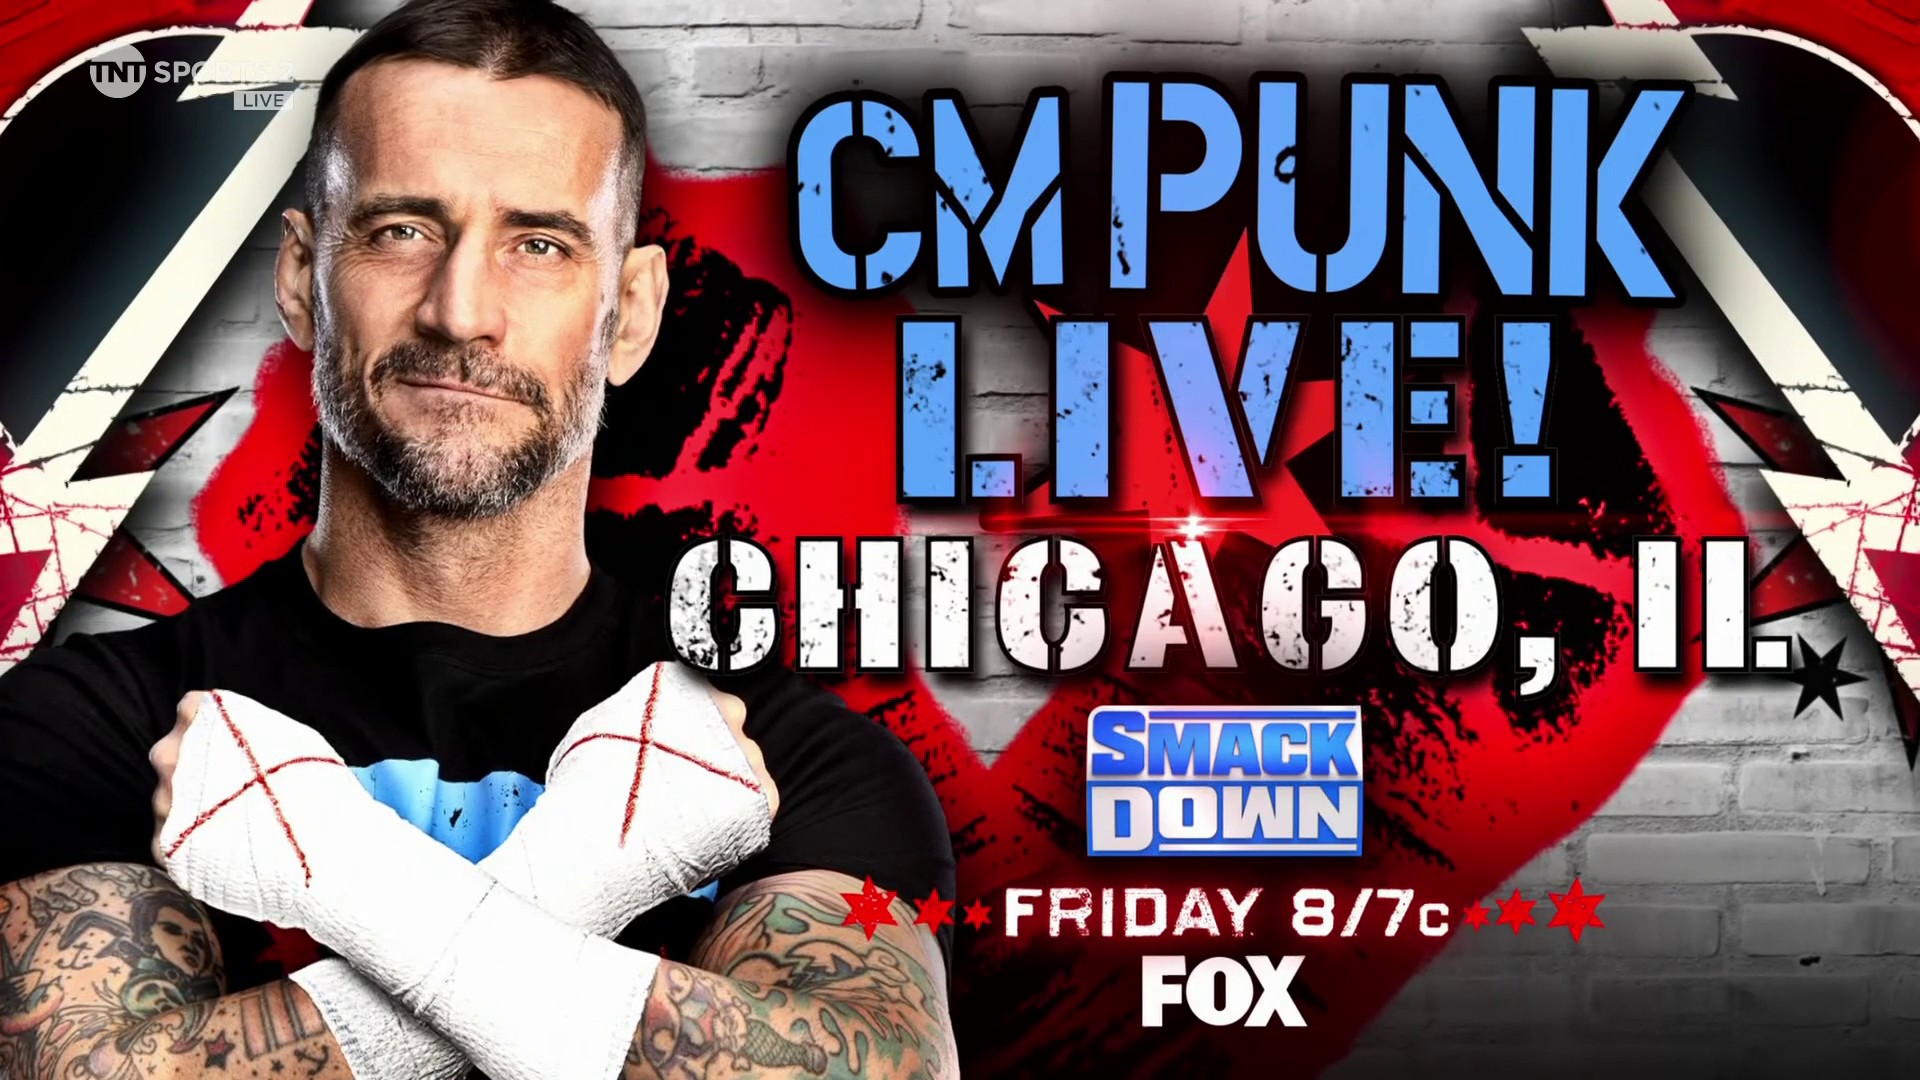 A match graphic hyping the appearance of CM Punk on WWE SmackDown.